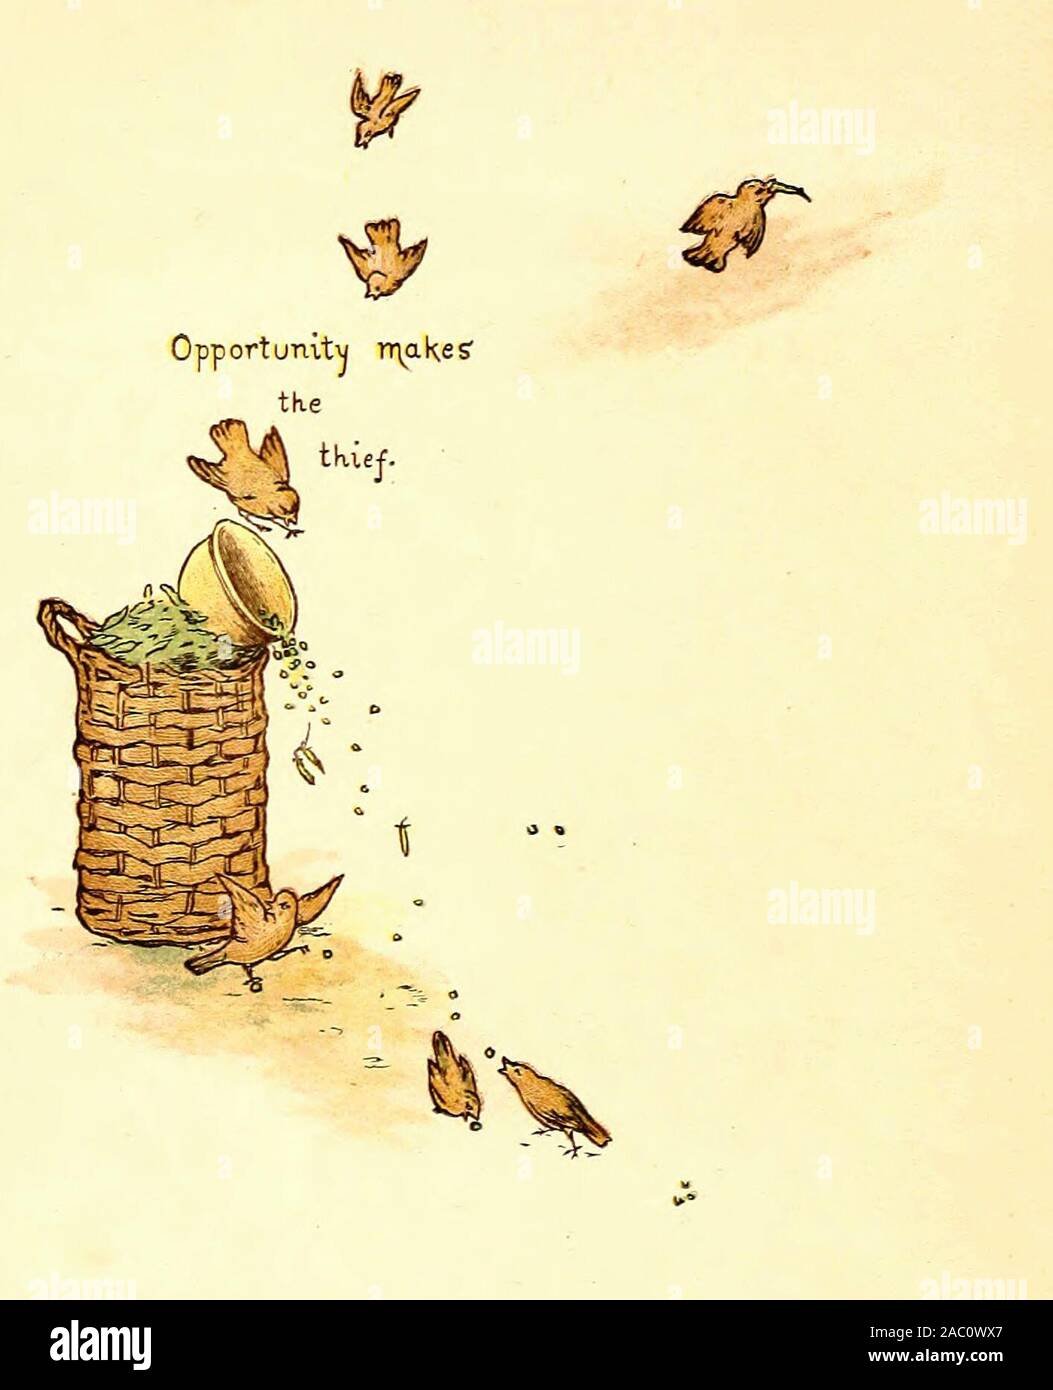 Opportunity Makes the Thief - A Vintage Illustration of an Old Proverb Stock Photo